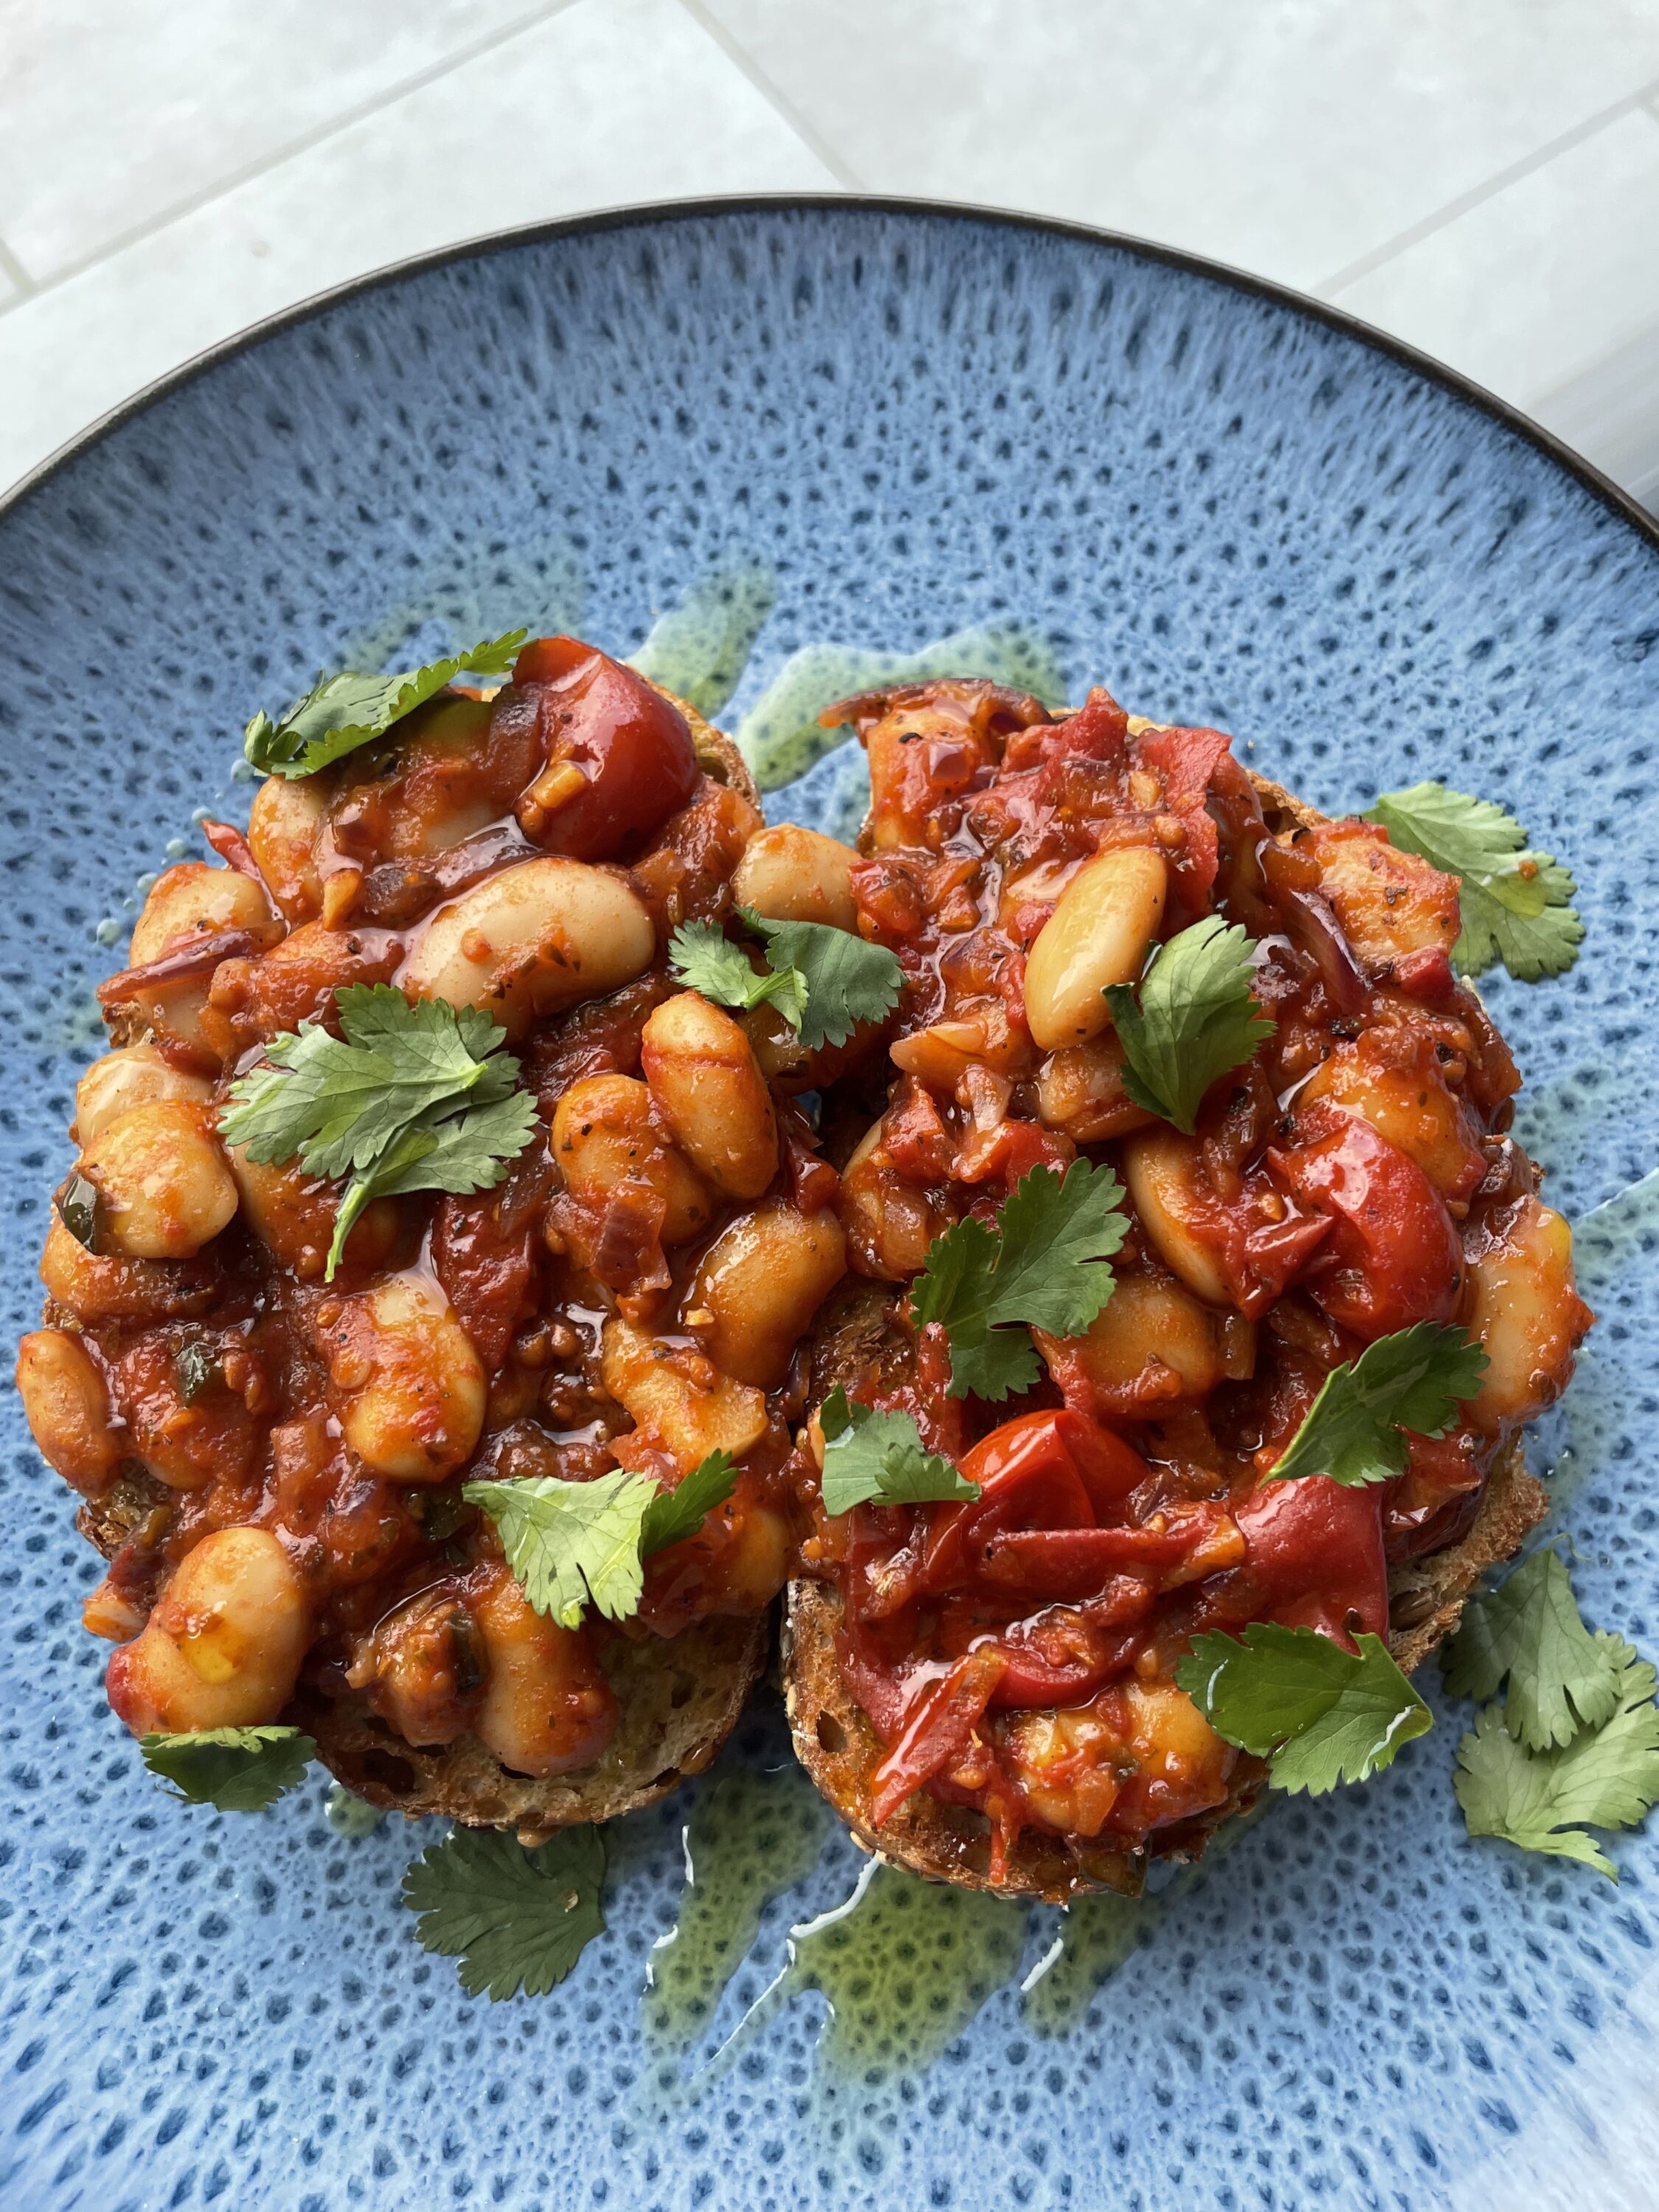 Spicy butter beans